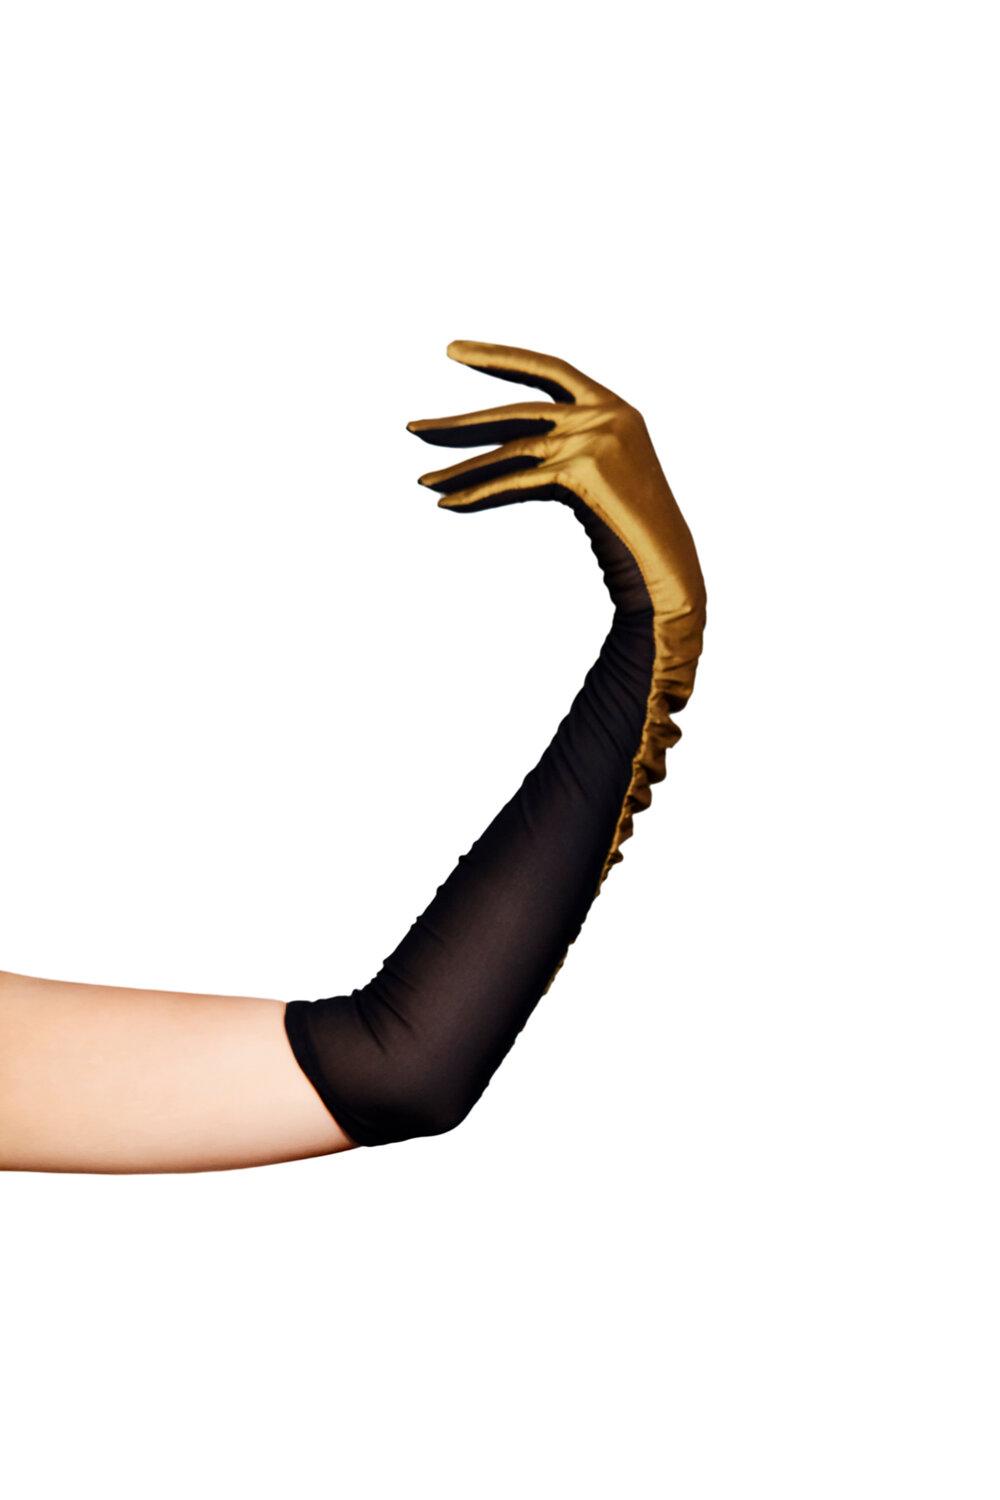 Power Mesh Opera Glove — LAEL OSNESS Luxury Gloves & Finer Things